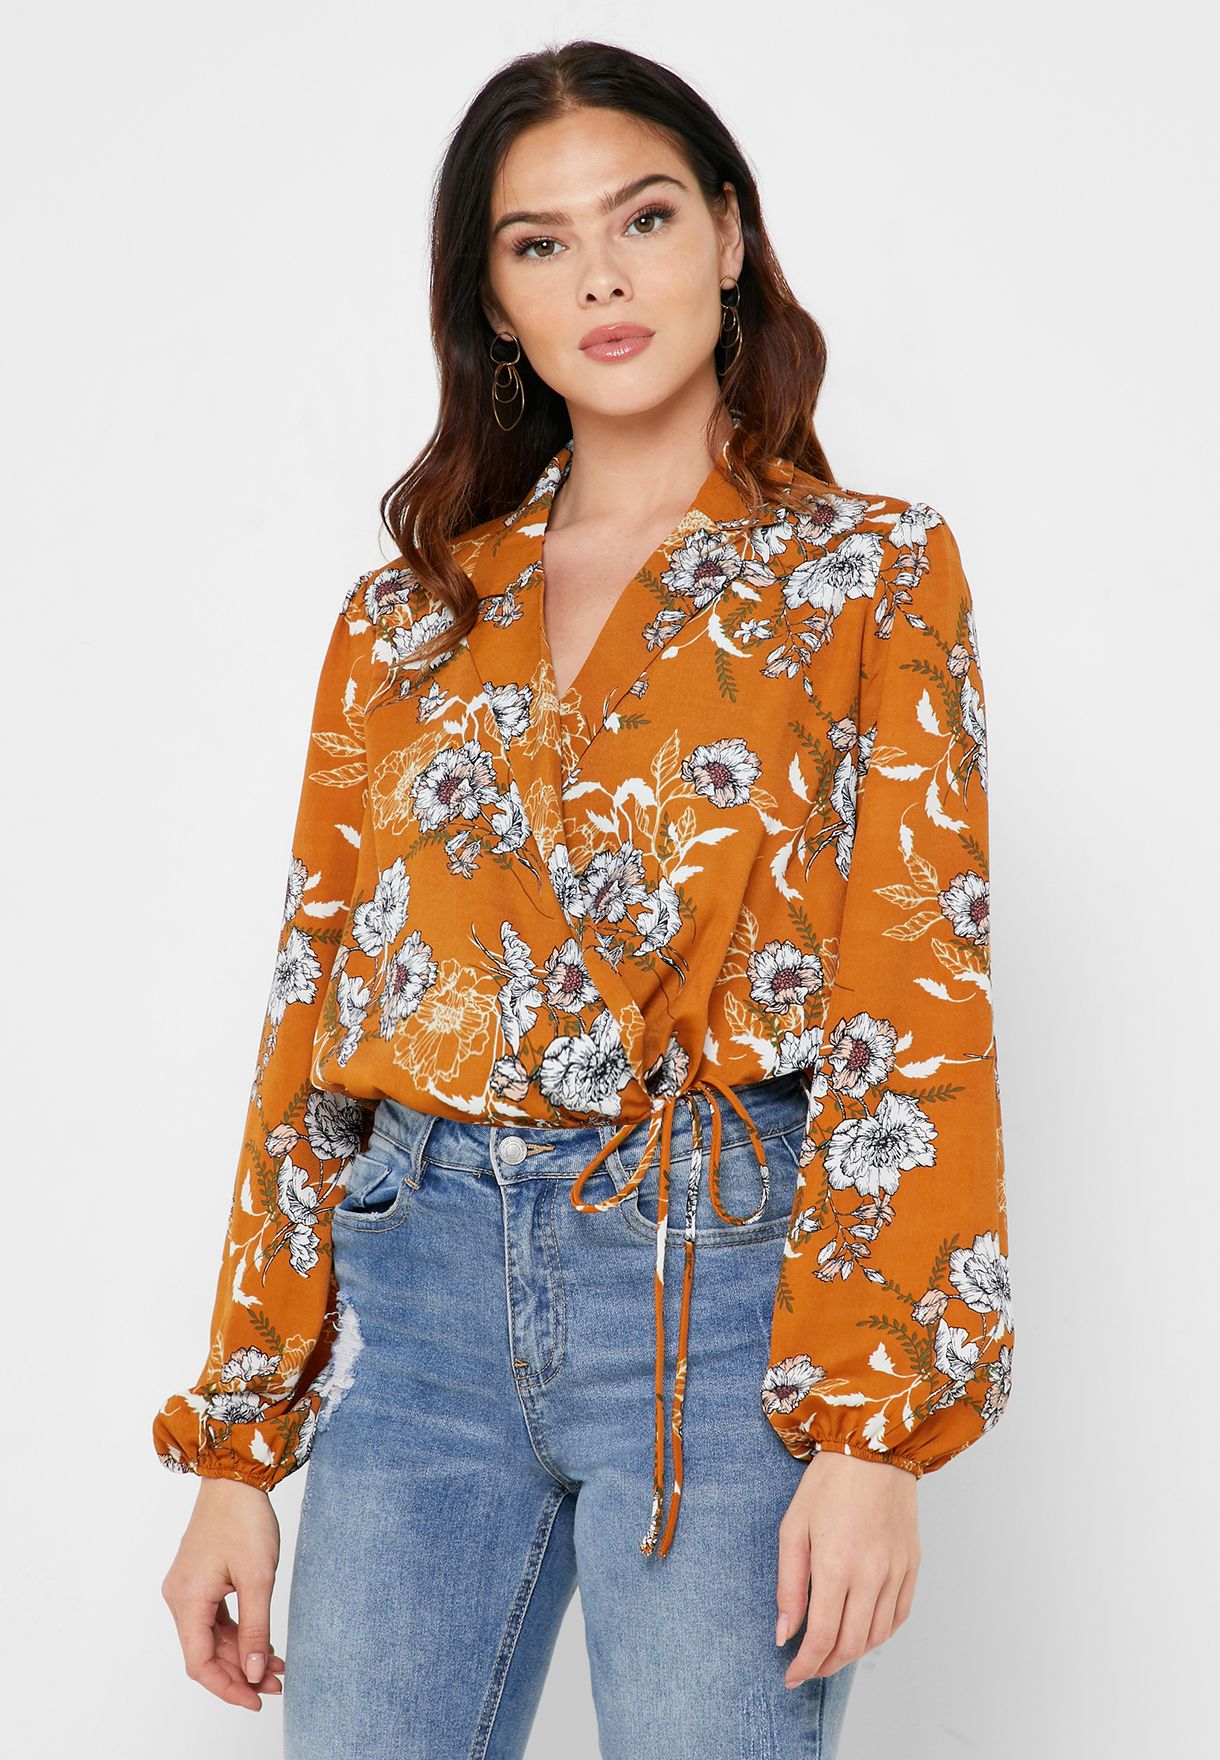 forever 21 surplice top